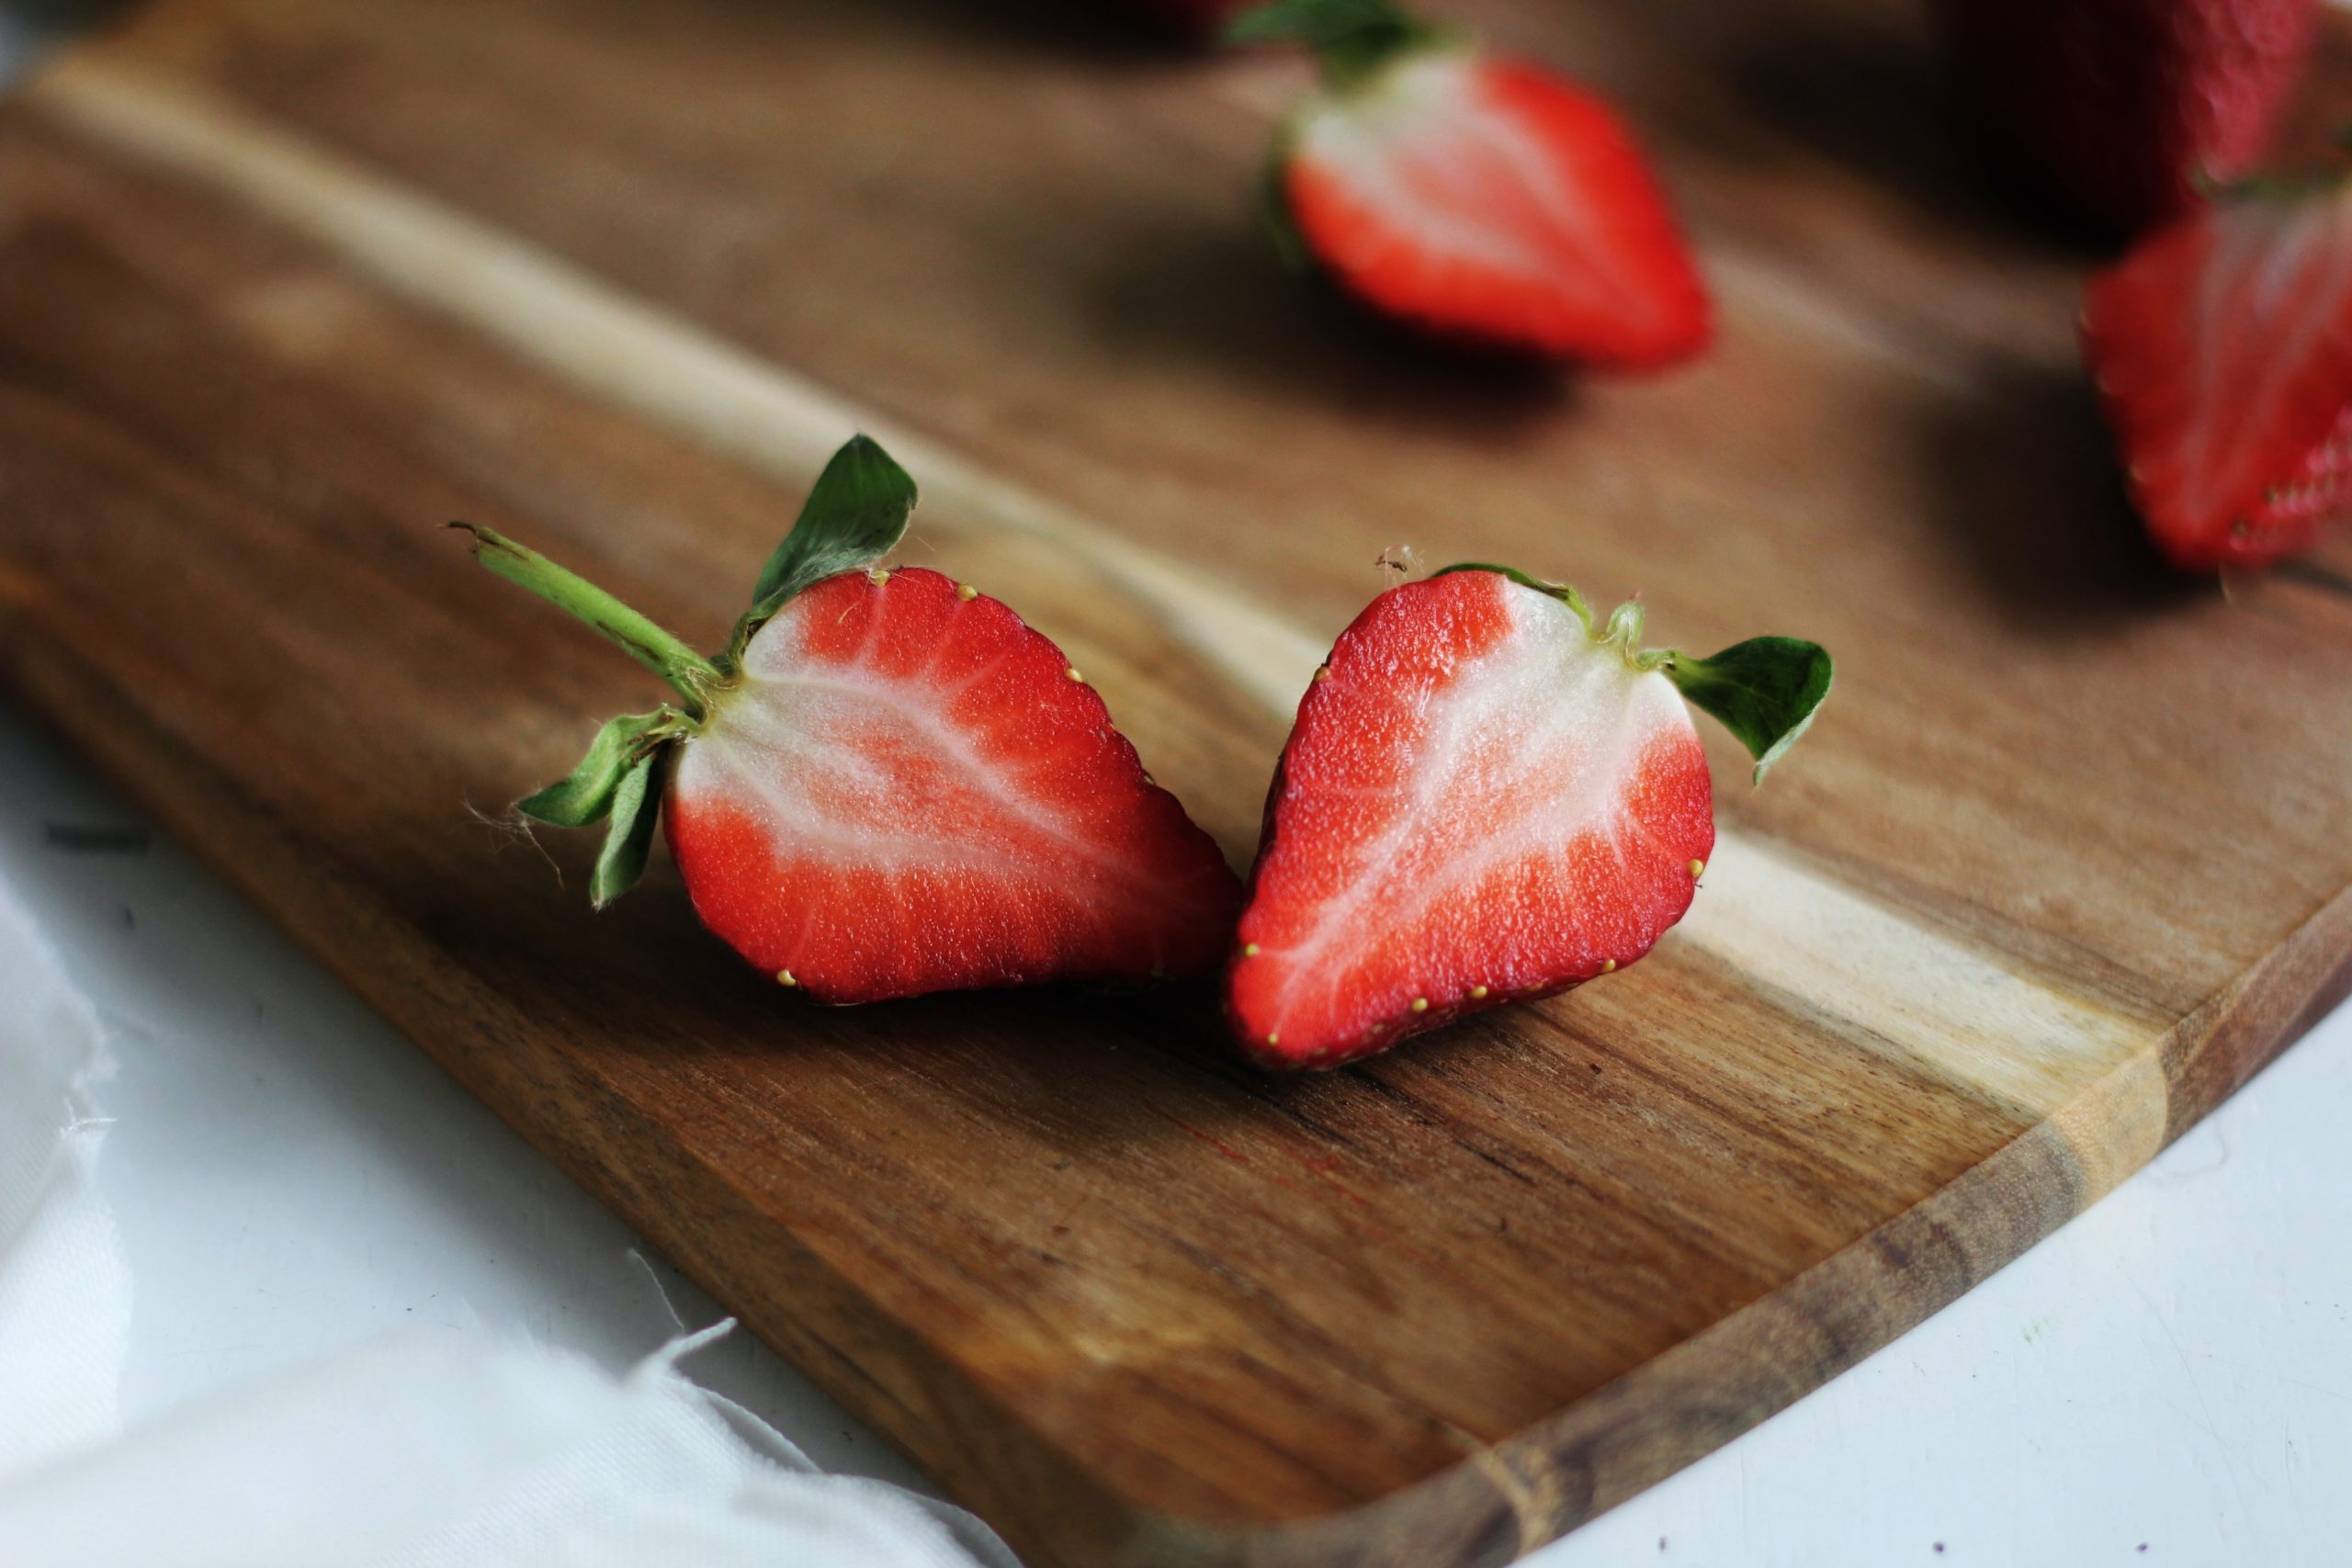 Strawberry sliced in half on a wooden cutting board. Strawberries are an excellent source of vitamin B12 and can reduce our risk of vitamin B12-deficiency anemia.